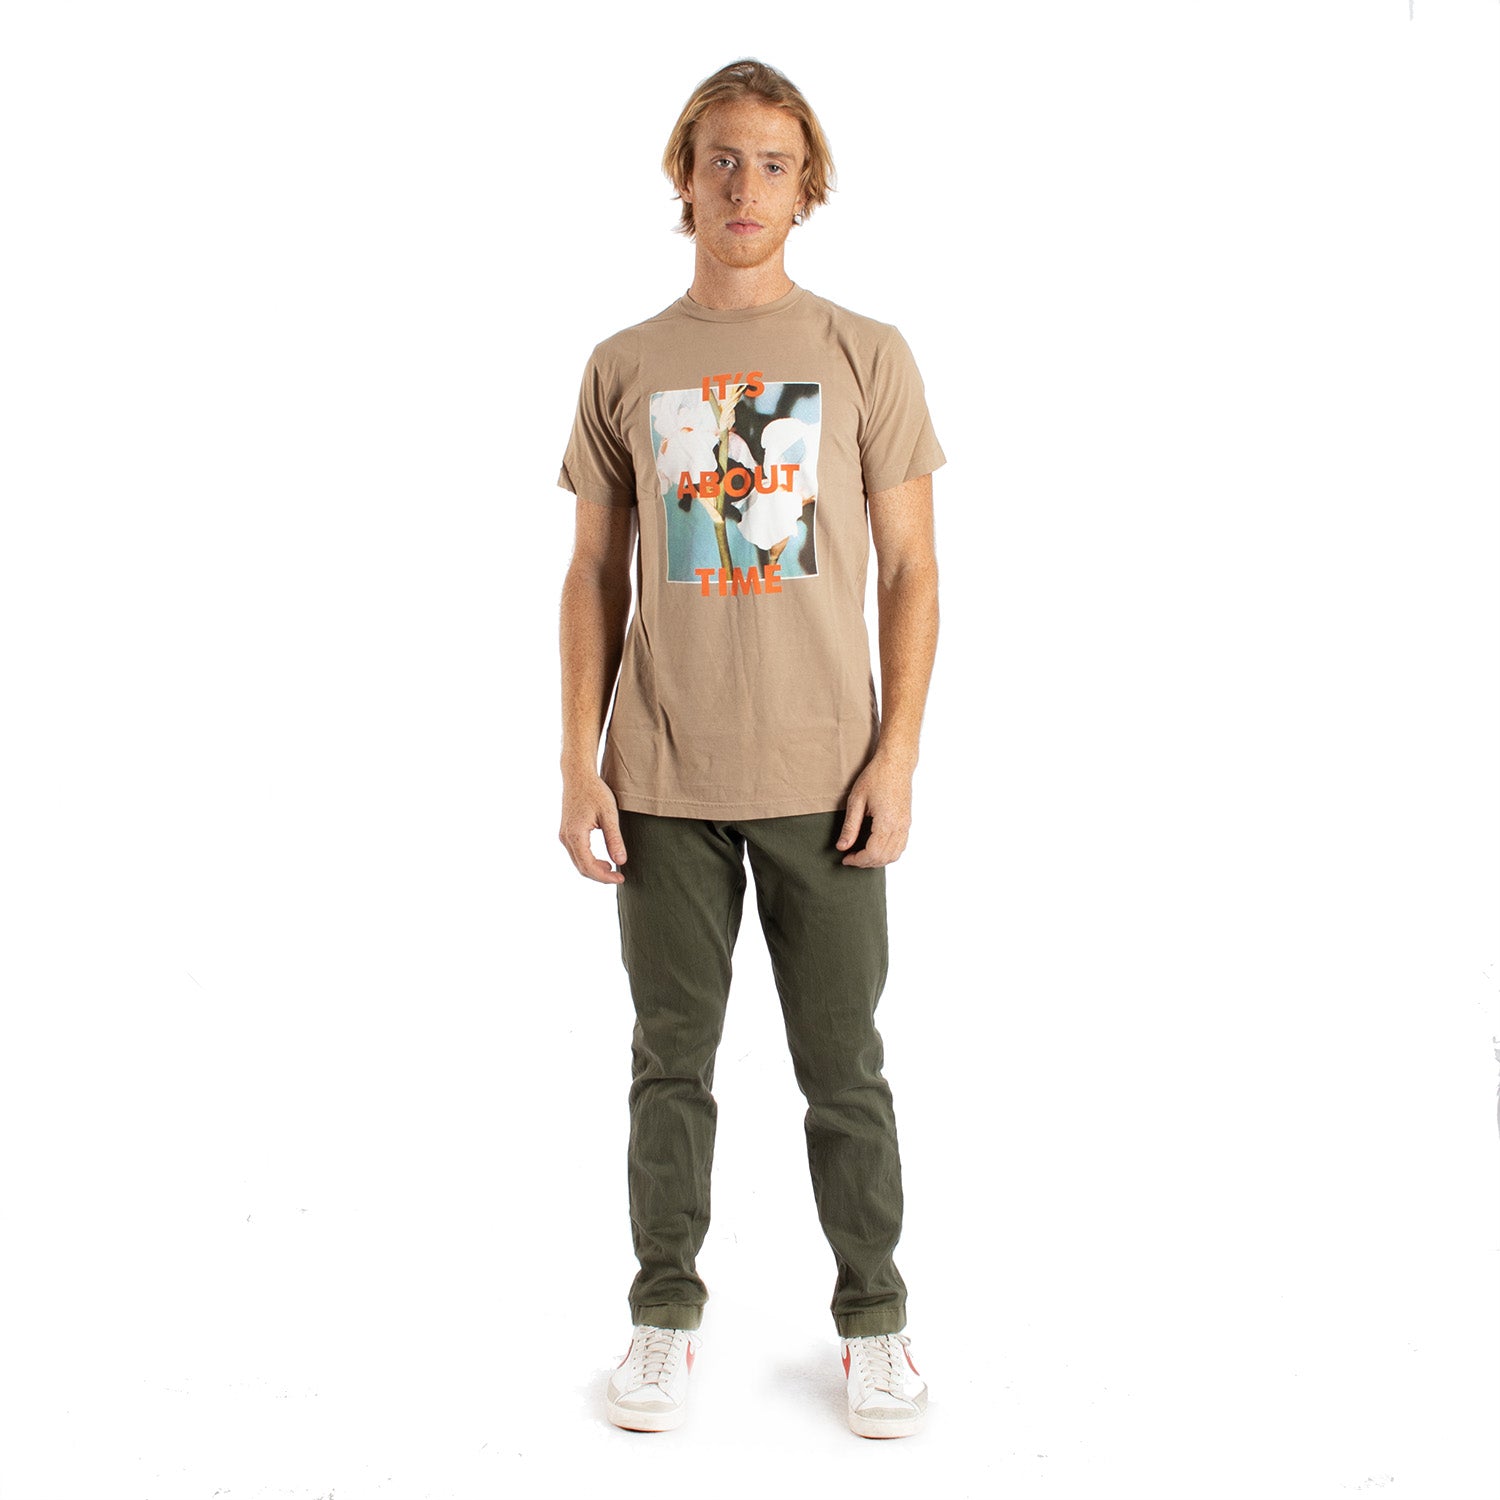 It's About Time Flowers khaki graphic tee by Altru Apparel